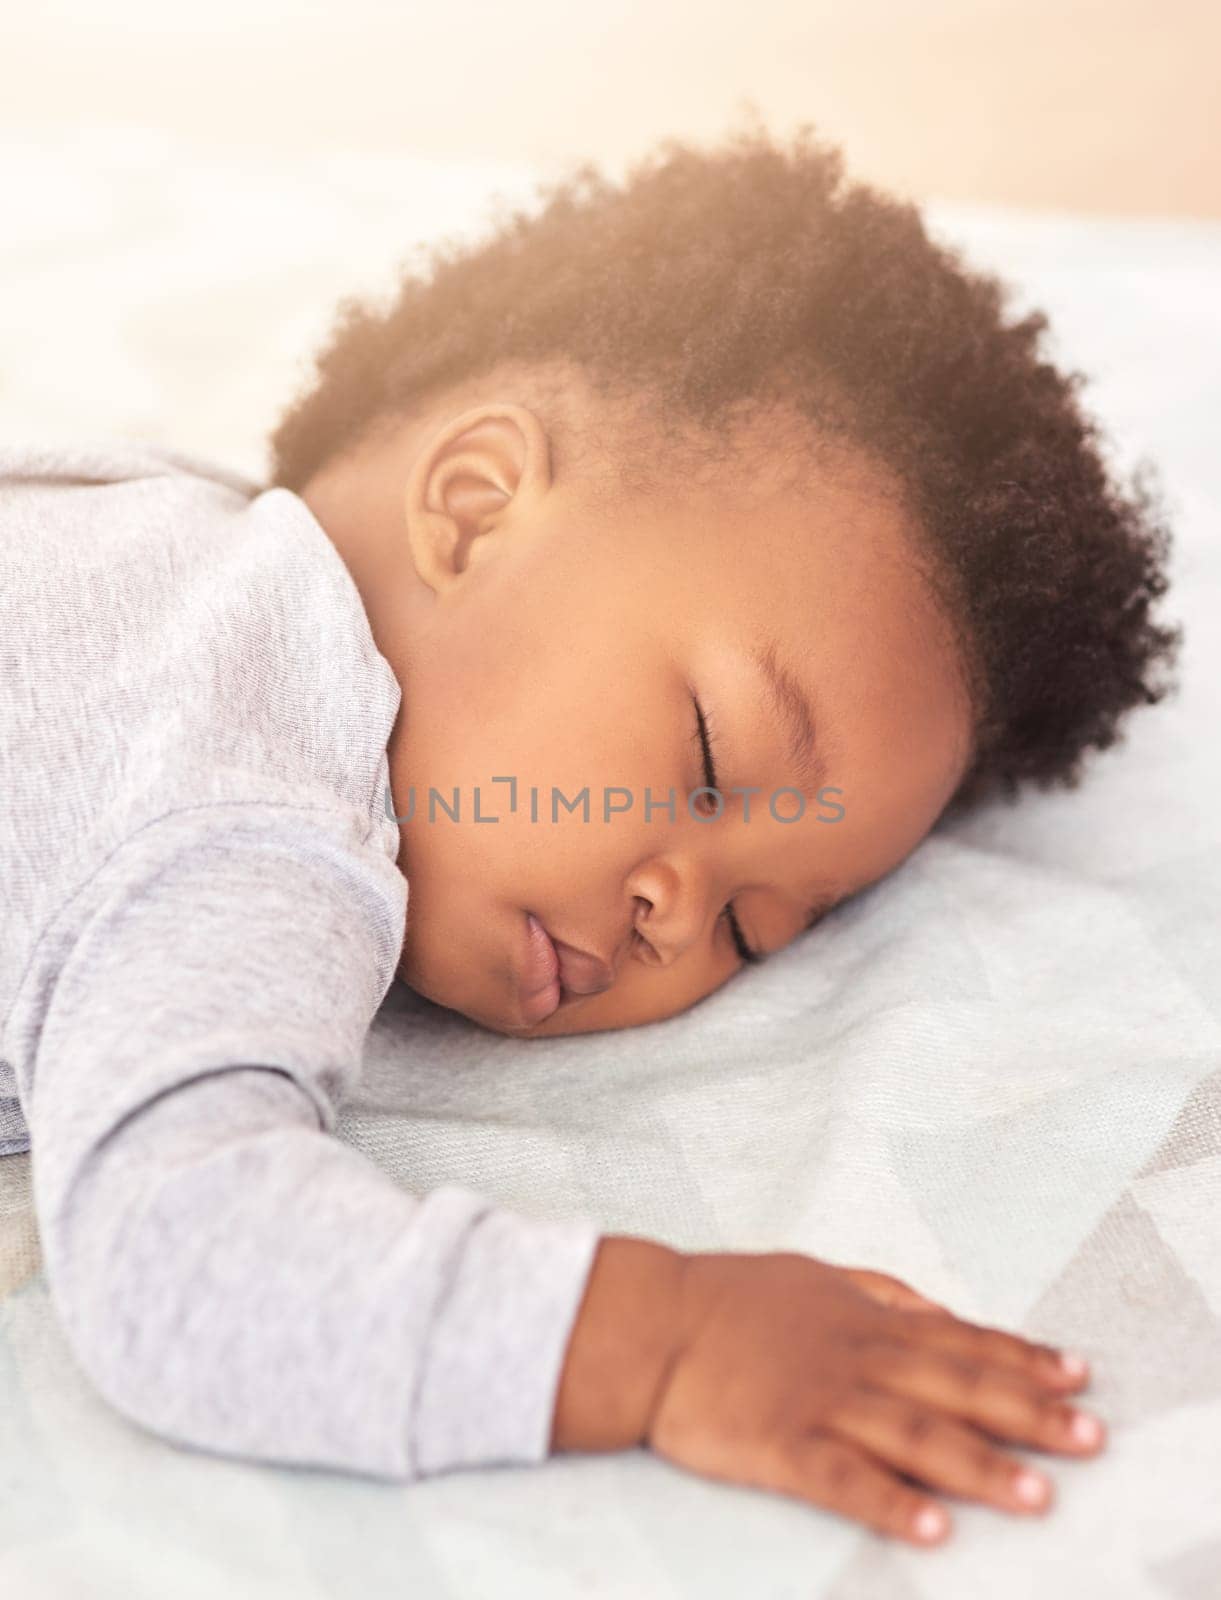 Tired, bed and baby sleeping in home on blanket for rest, nap time and dreaming in nursery. Childcare, newborn and cute, adorable and African child in bedroom sleep for comfort, relaxing and calm.